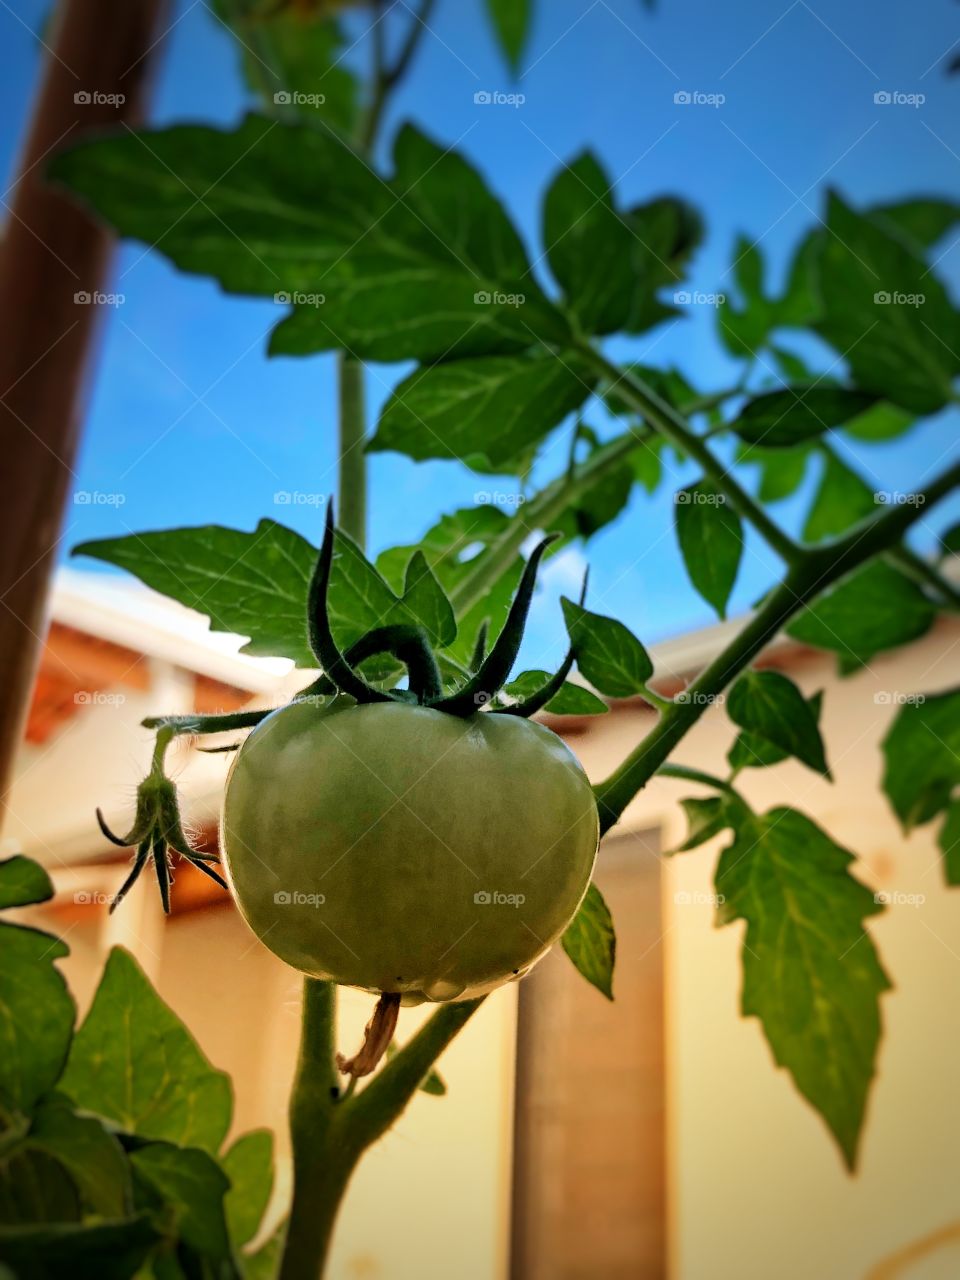 A lone tomato growing in my backyard garden. It is still green, but it is big. Perhaps it becomes a good salad.